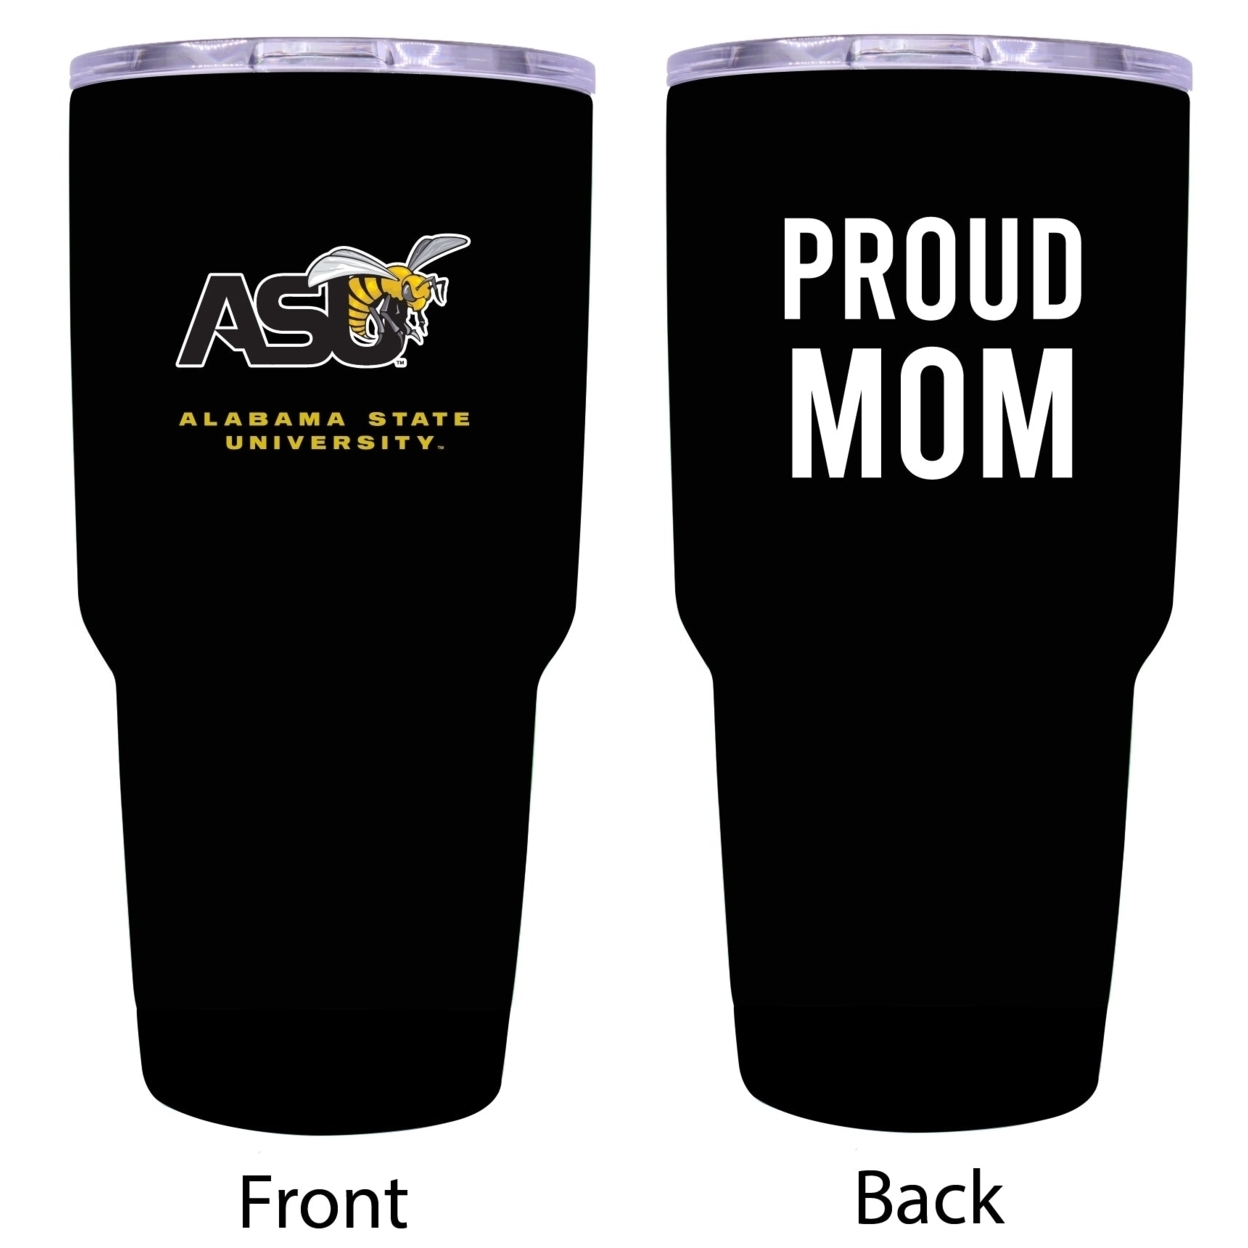 R And R Imports Alabama State University Proud Mom 24 Oz Insulated Stainless Steel Tumblers Black.